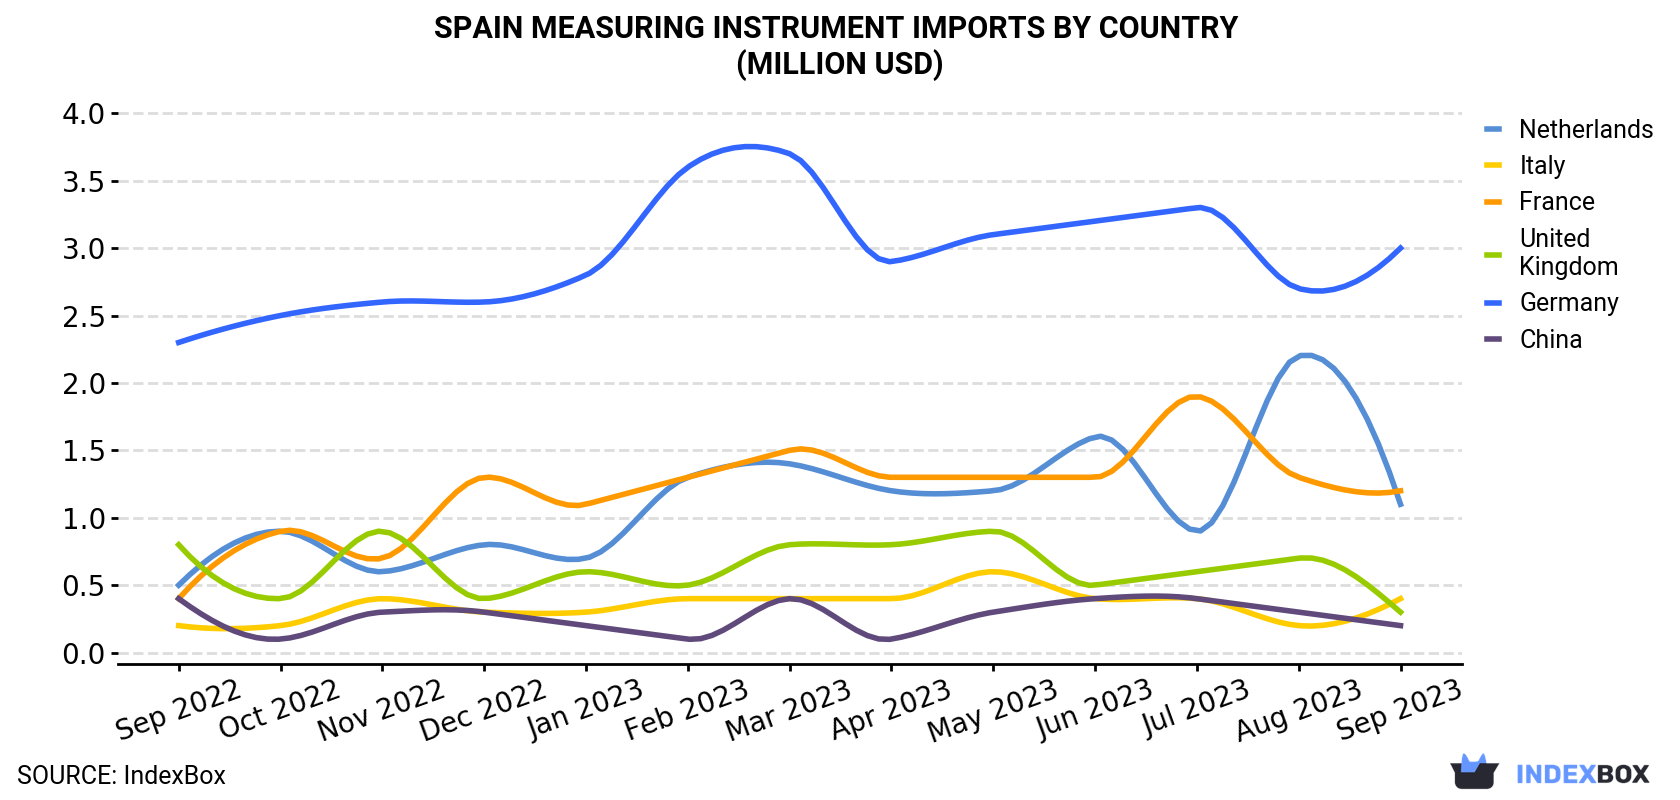 Spain Measuring Instrument Imports By Country (Million USD)